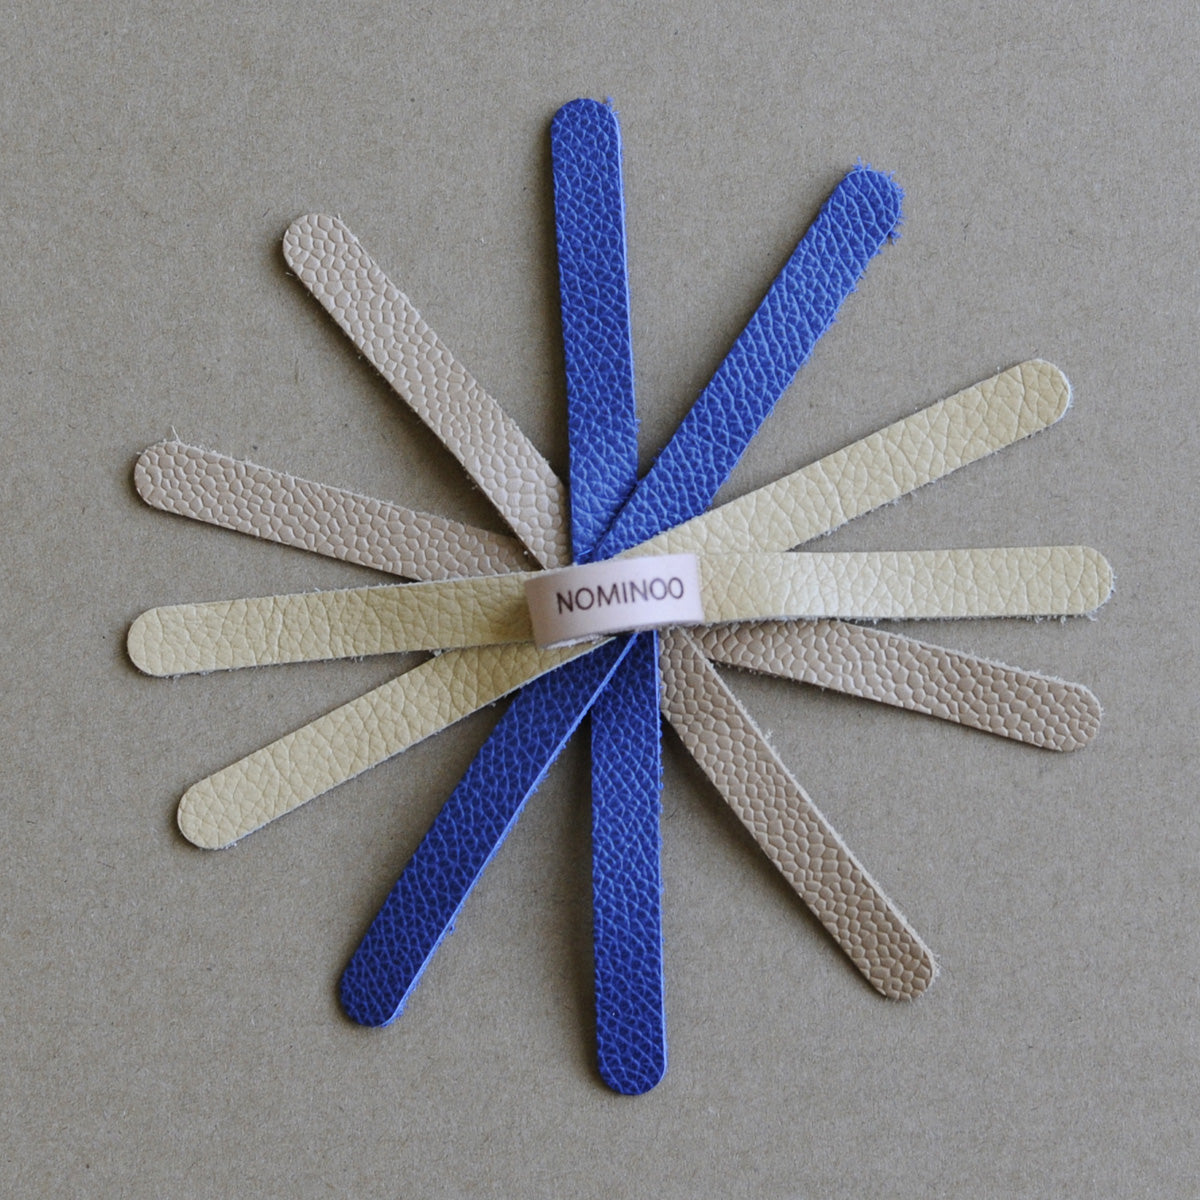 Nominoo Fringe Cat Toy, Handmade In Blue & Tan Leather | at Made Moggie